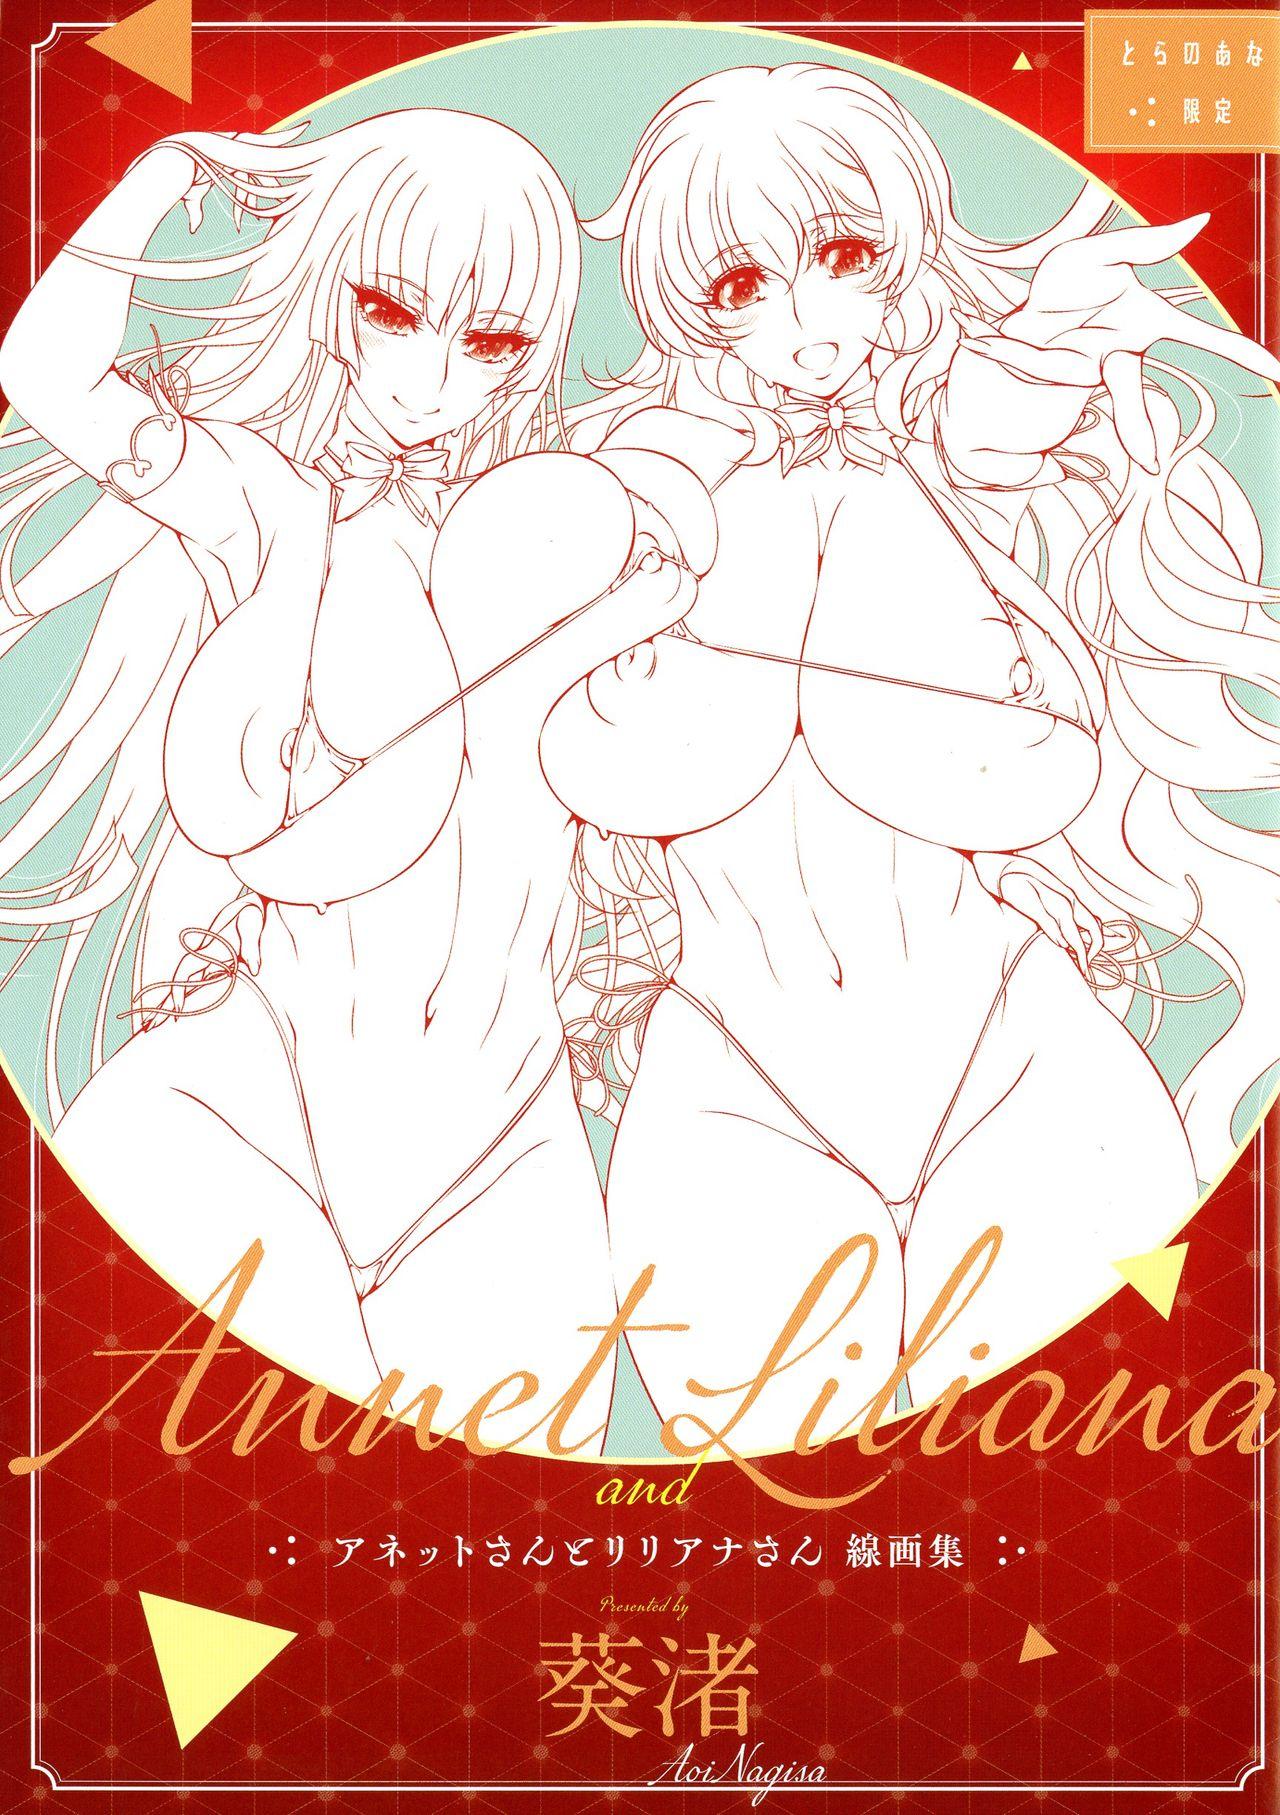 ANNET & LILIANA First Edition 170